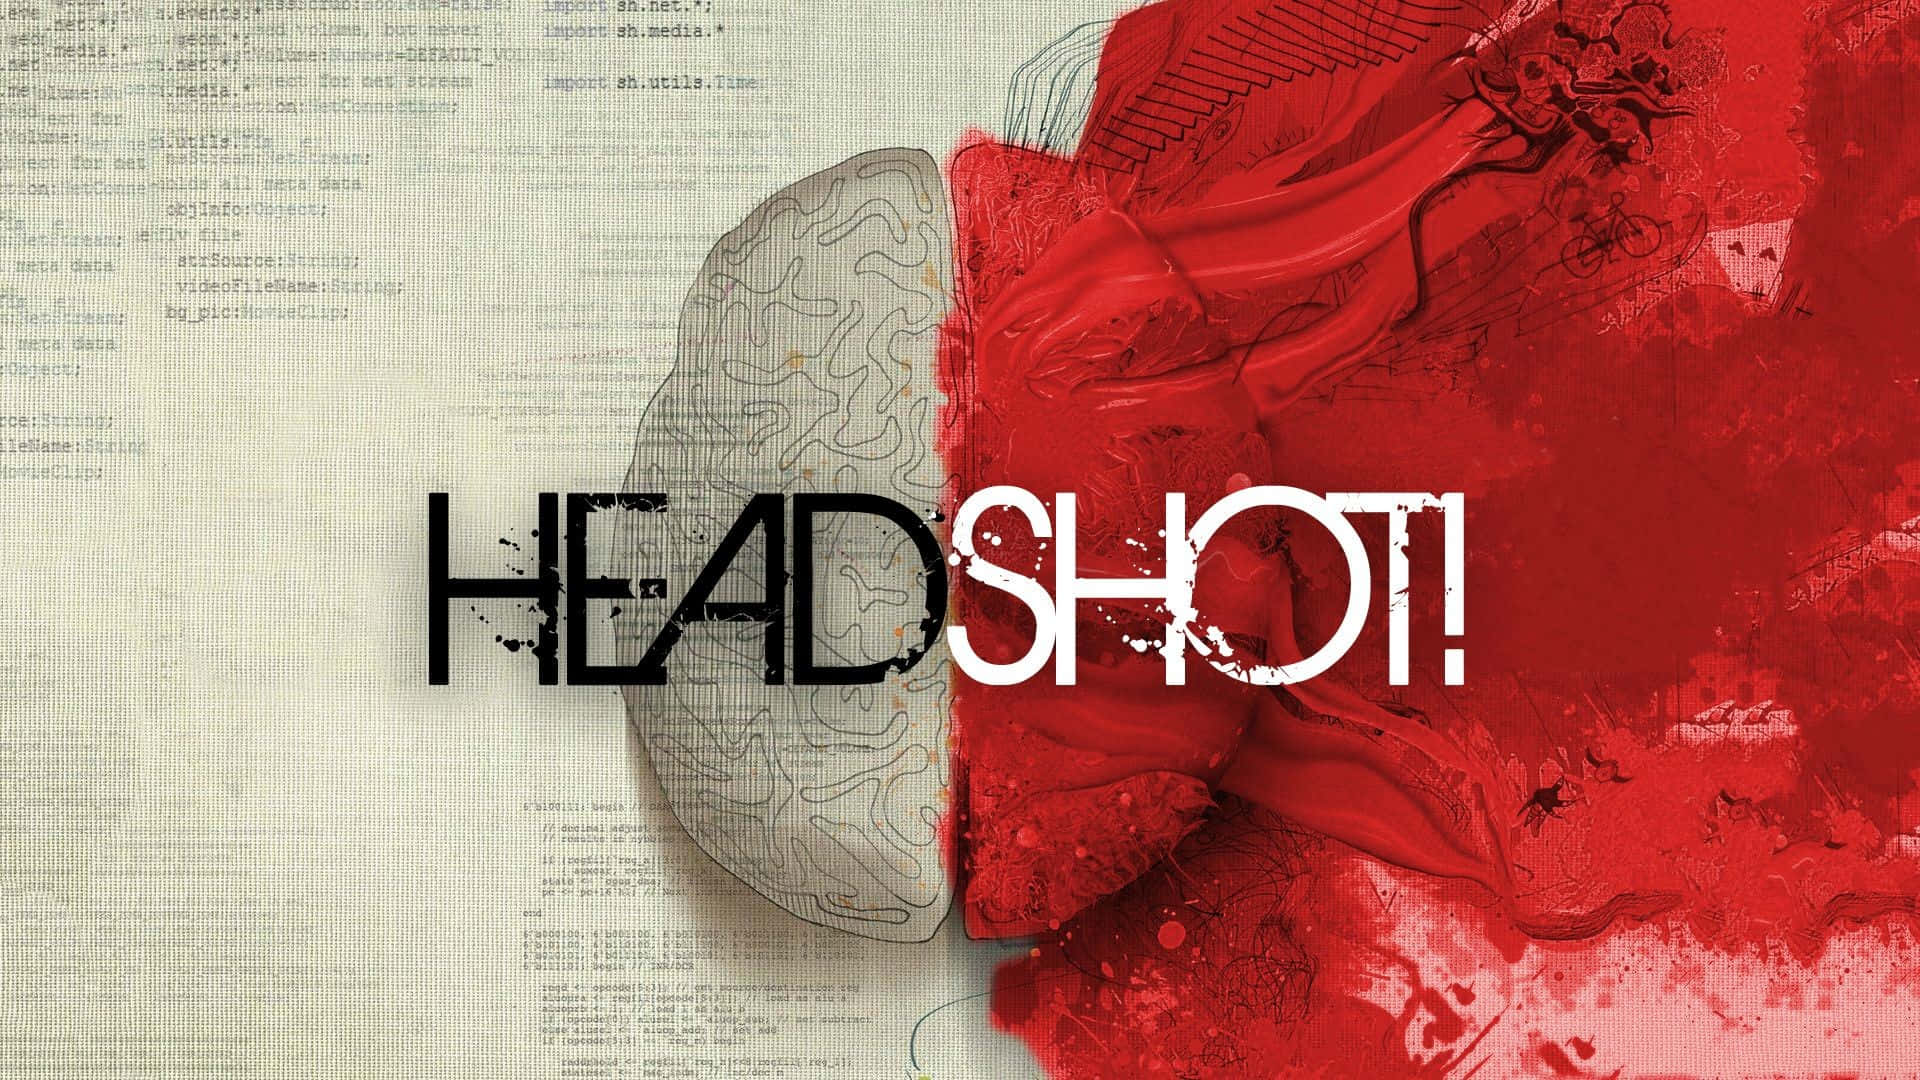 Headshot - A Brain With Red Paint On It Background